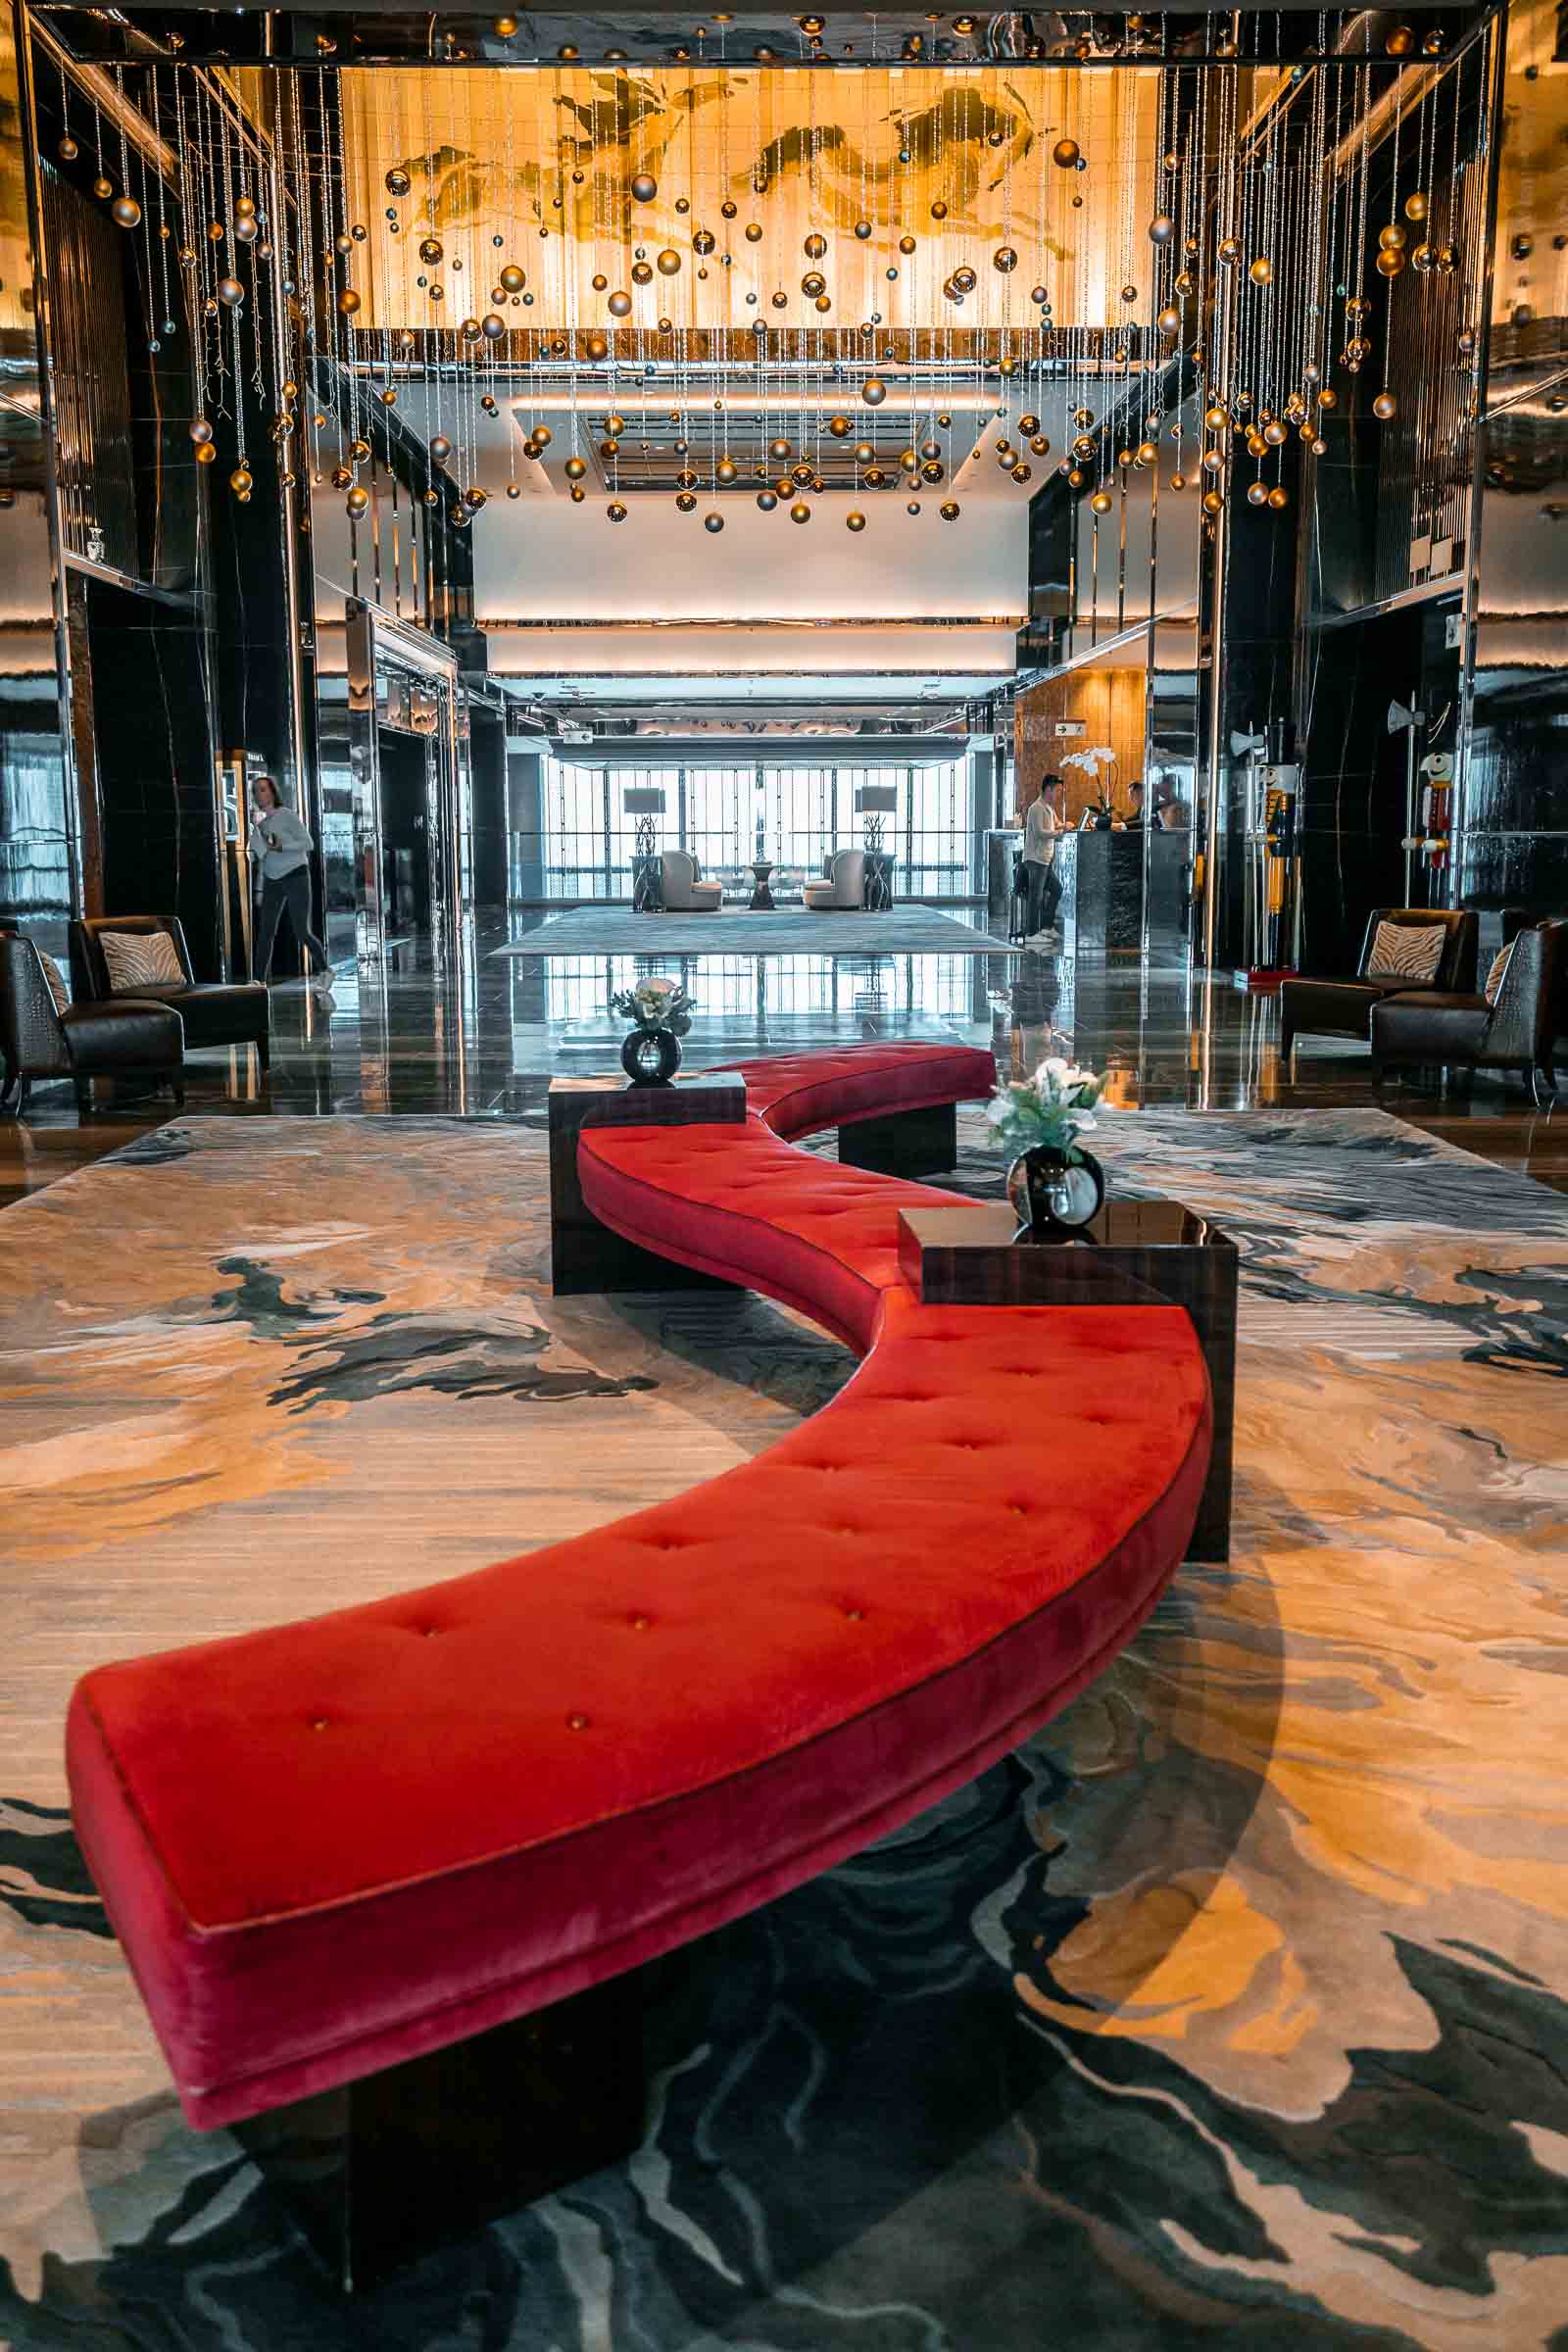 Lobby in the Ritz Carlton Hong Kong with a golden and dark marble design and a big red sofa